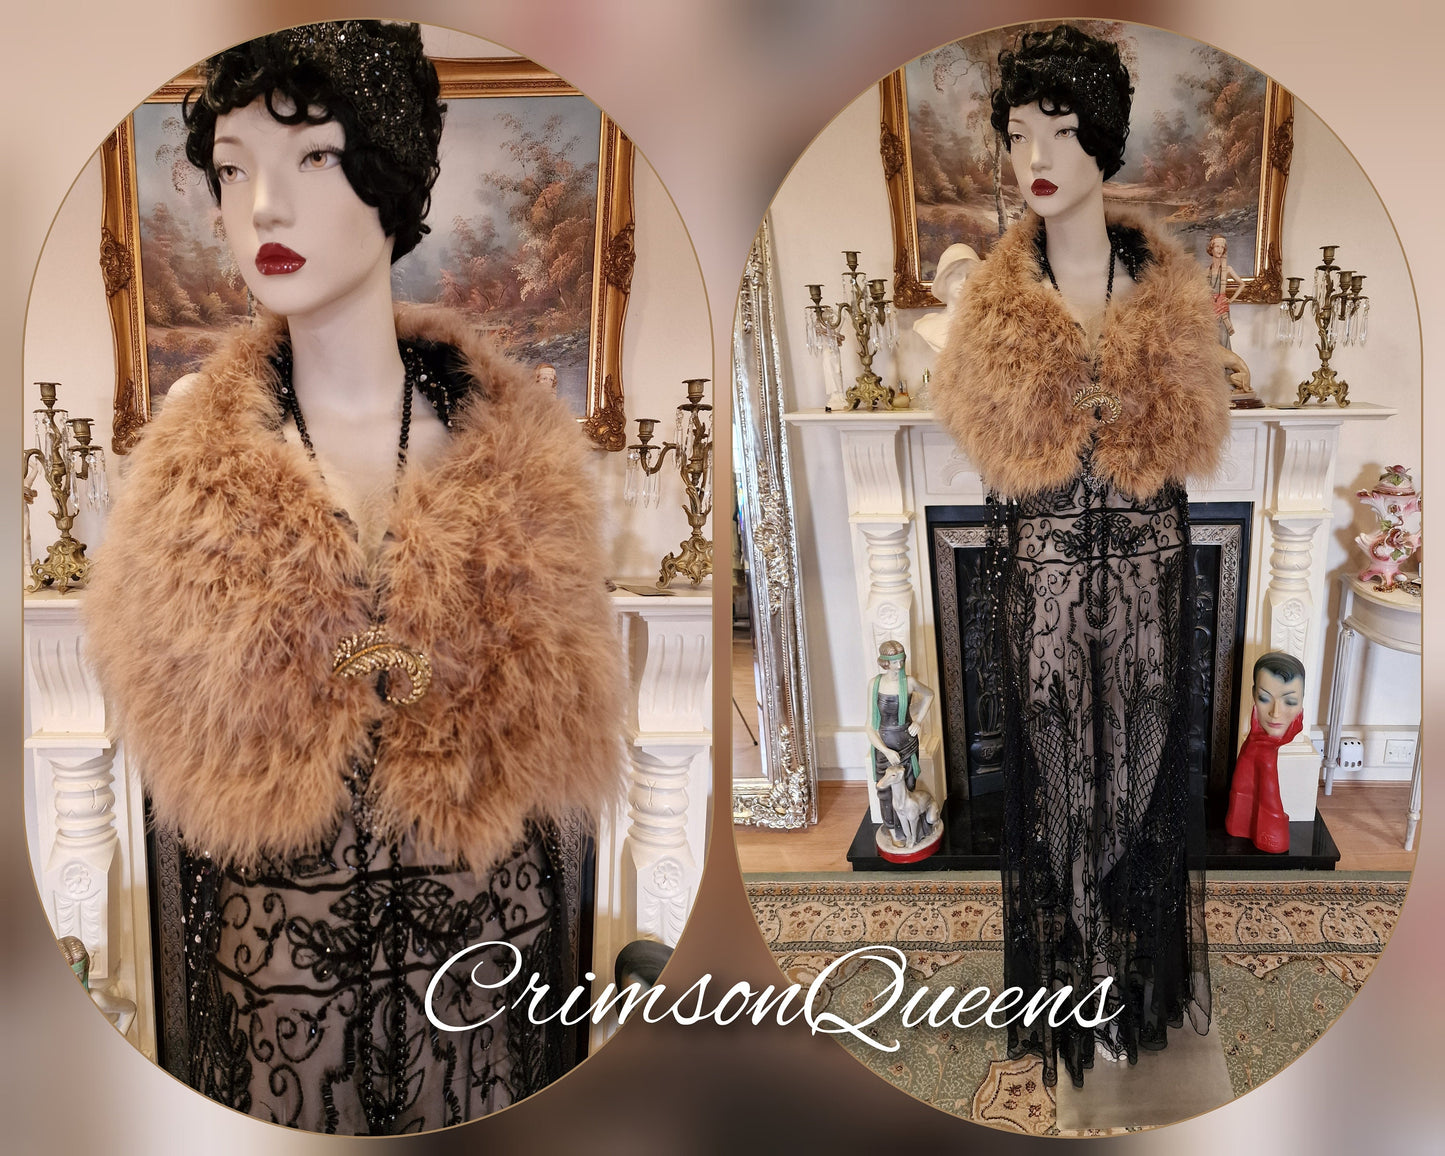 Vintage Downton Abbey Great Gatsby black beaded sheer mesh dress 1920s flapper ensemble with Art Deco lace duster size UK 10 12 US 6 8